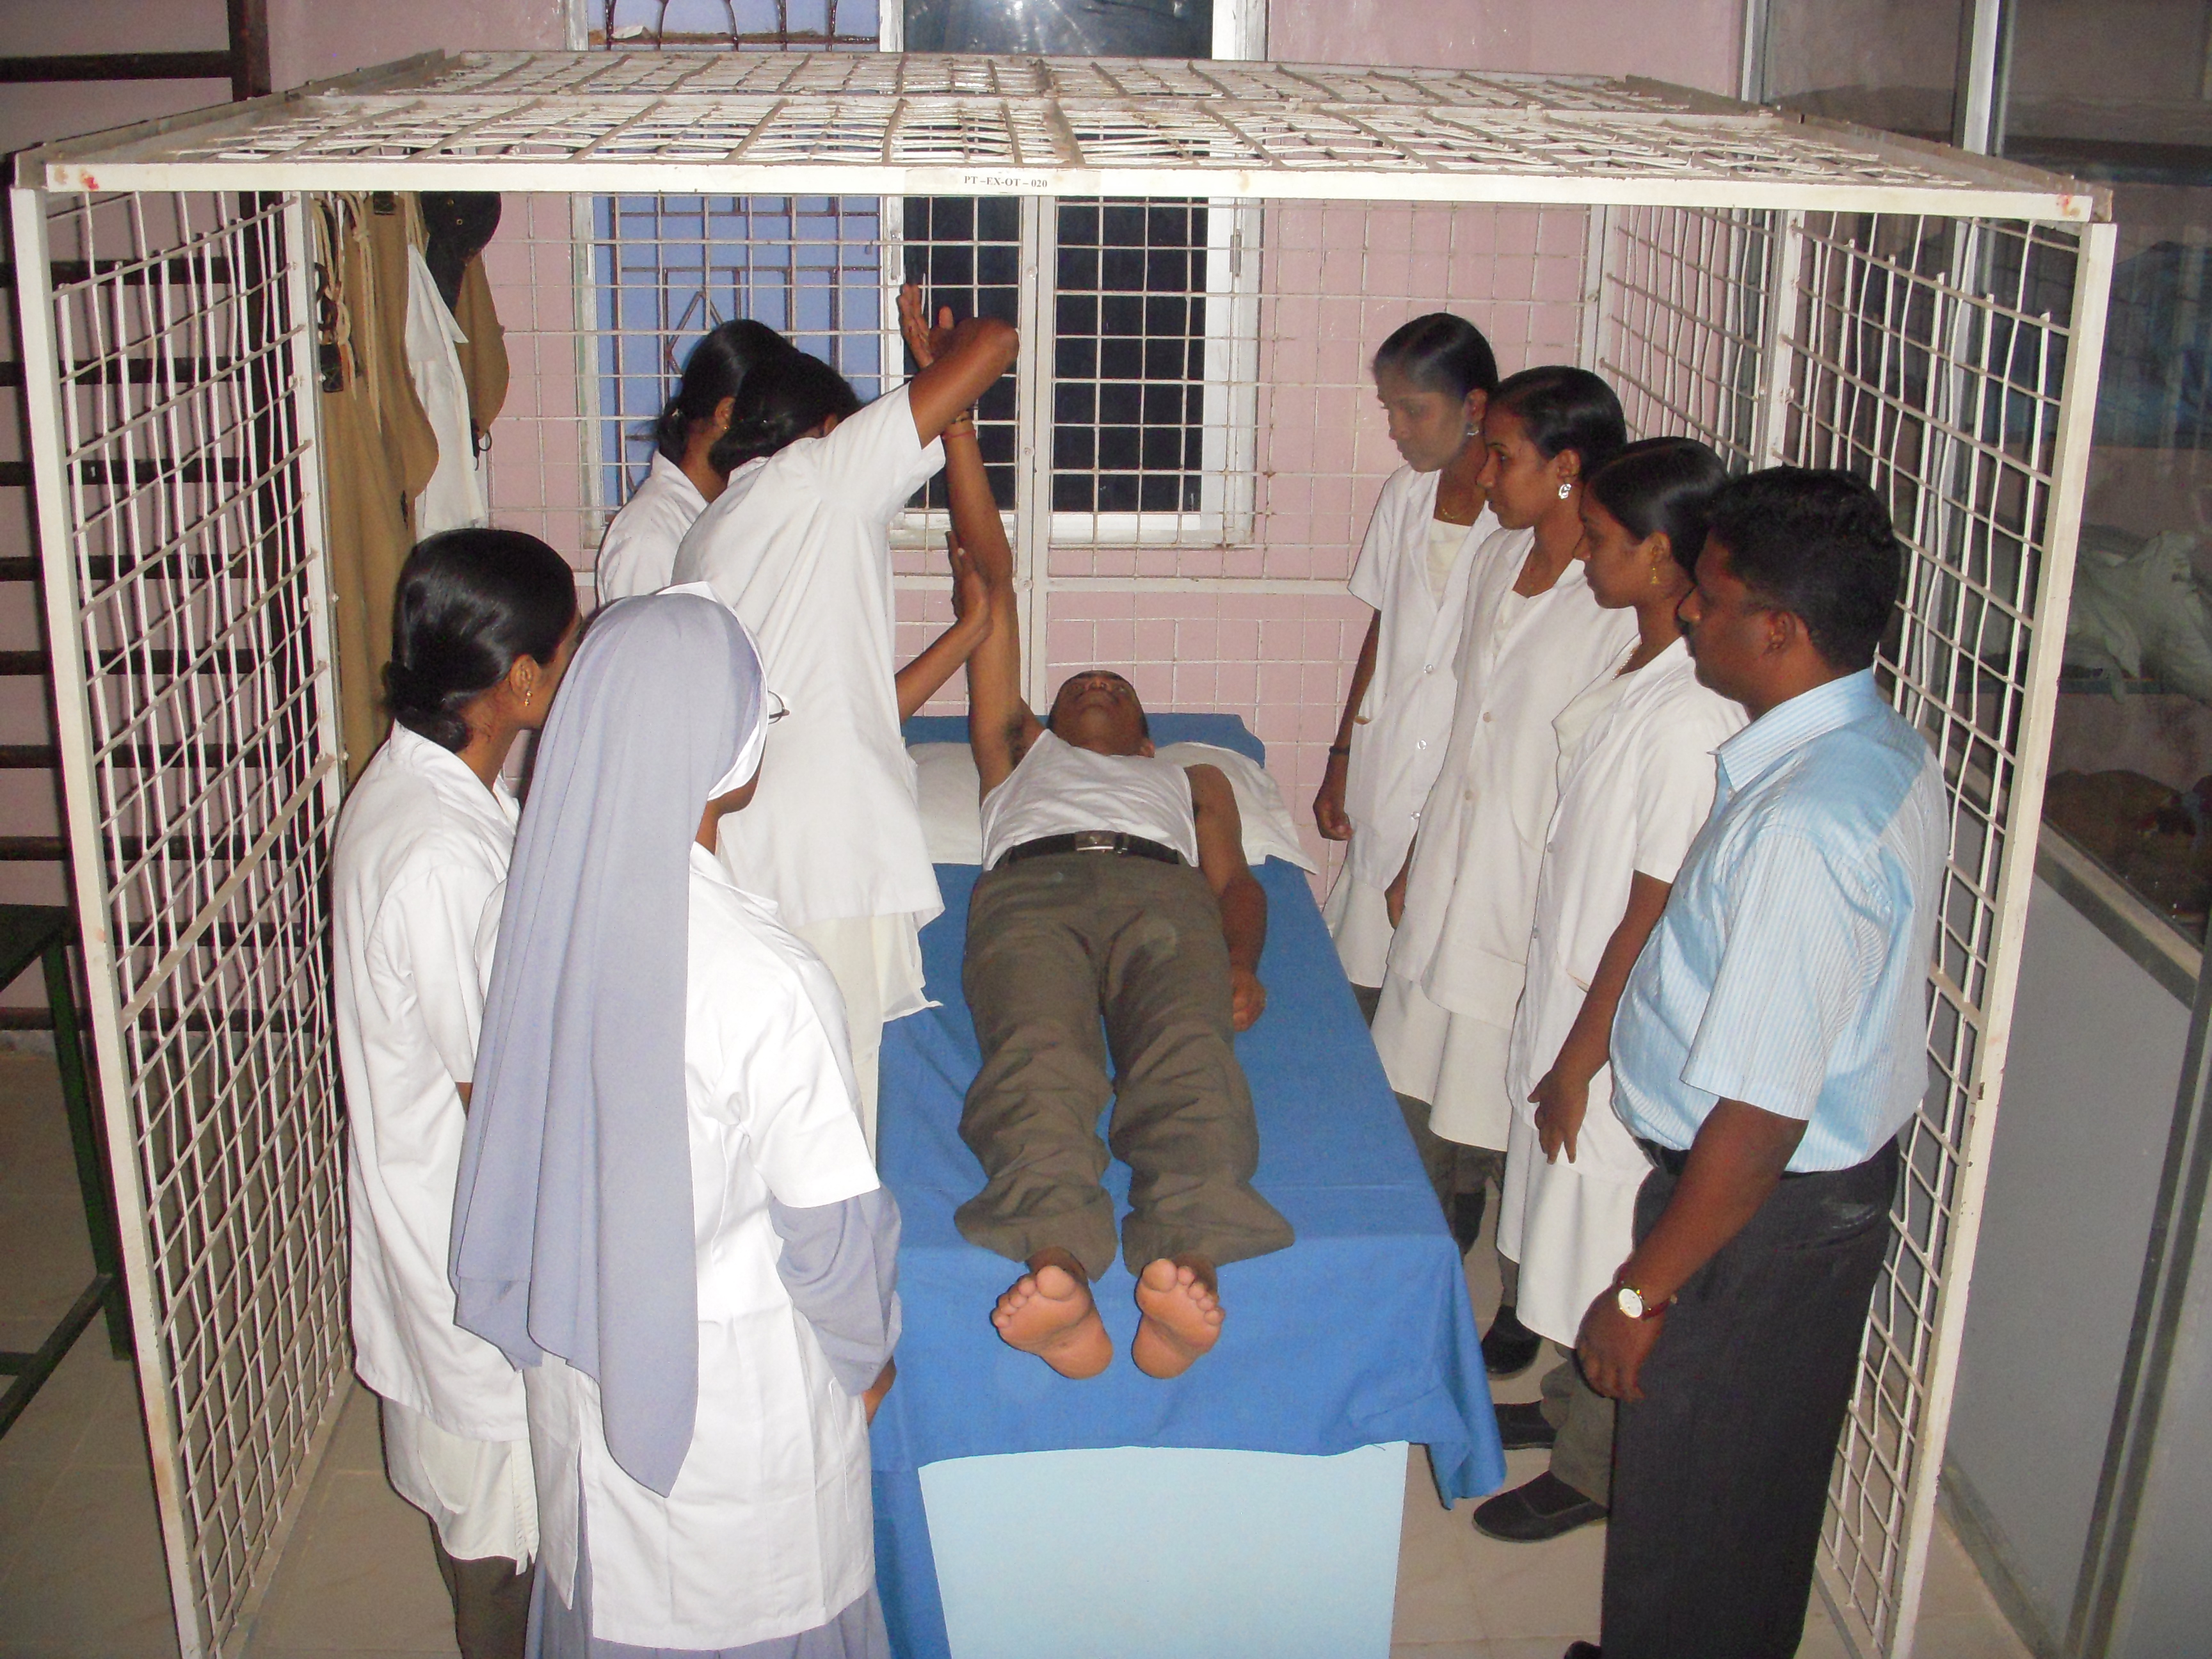 RVS College of Physiotherapy